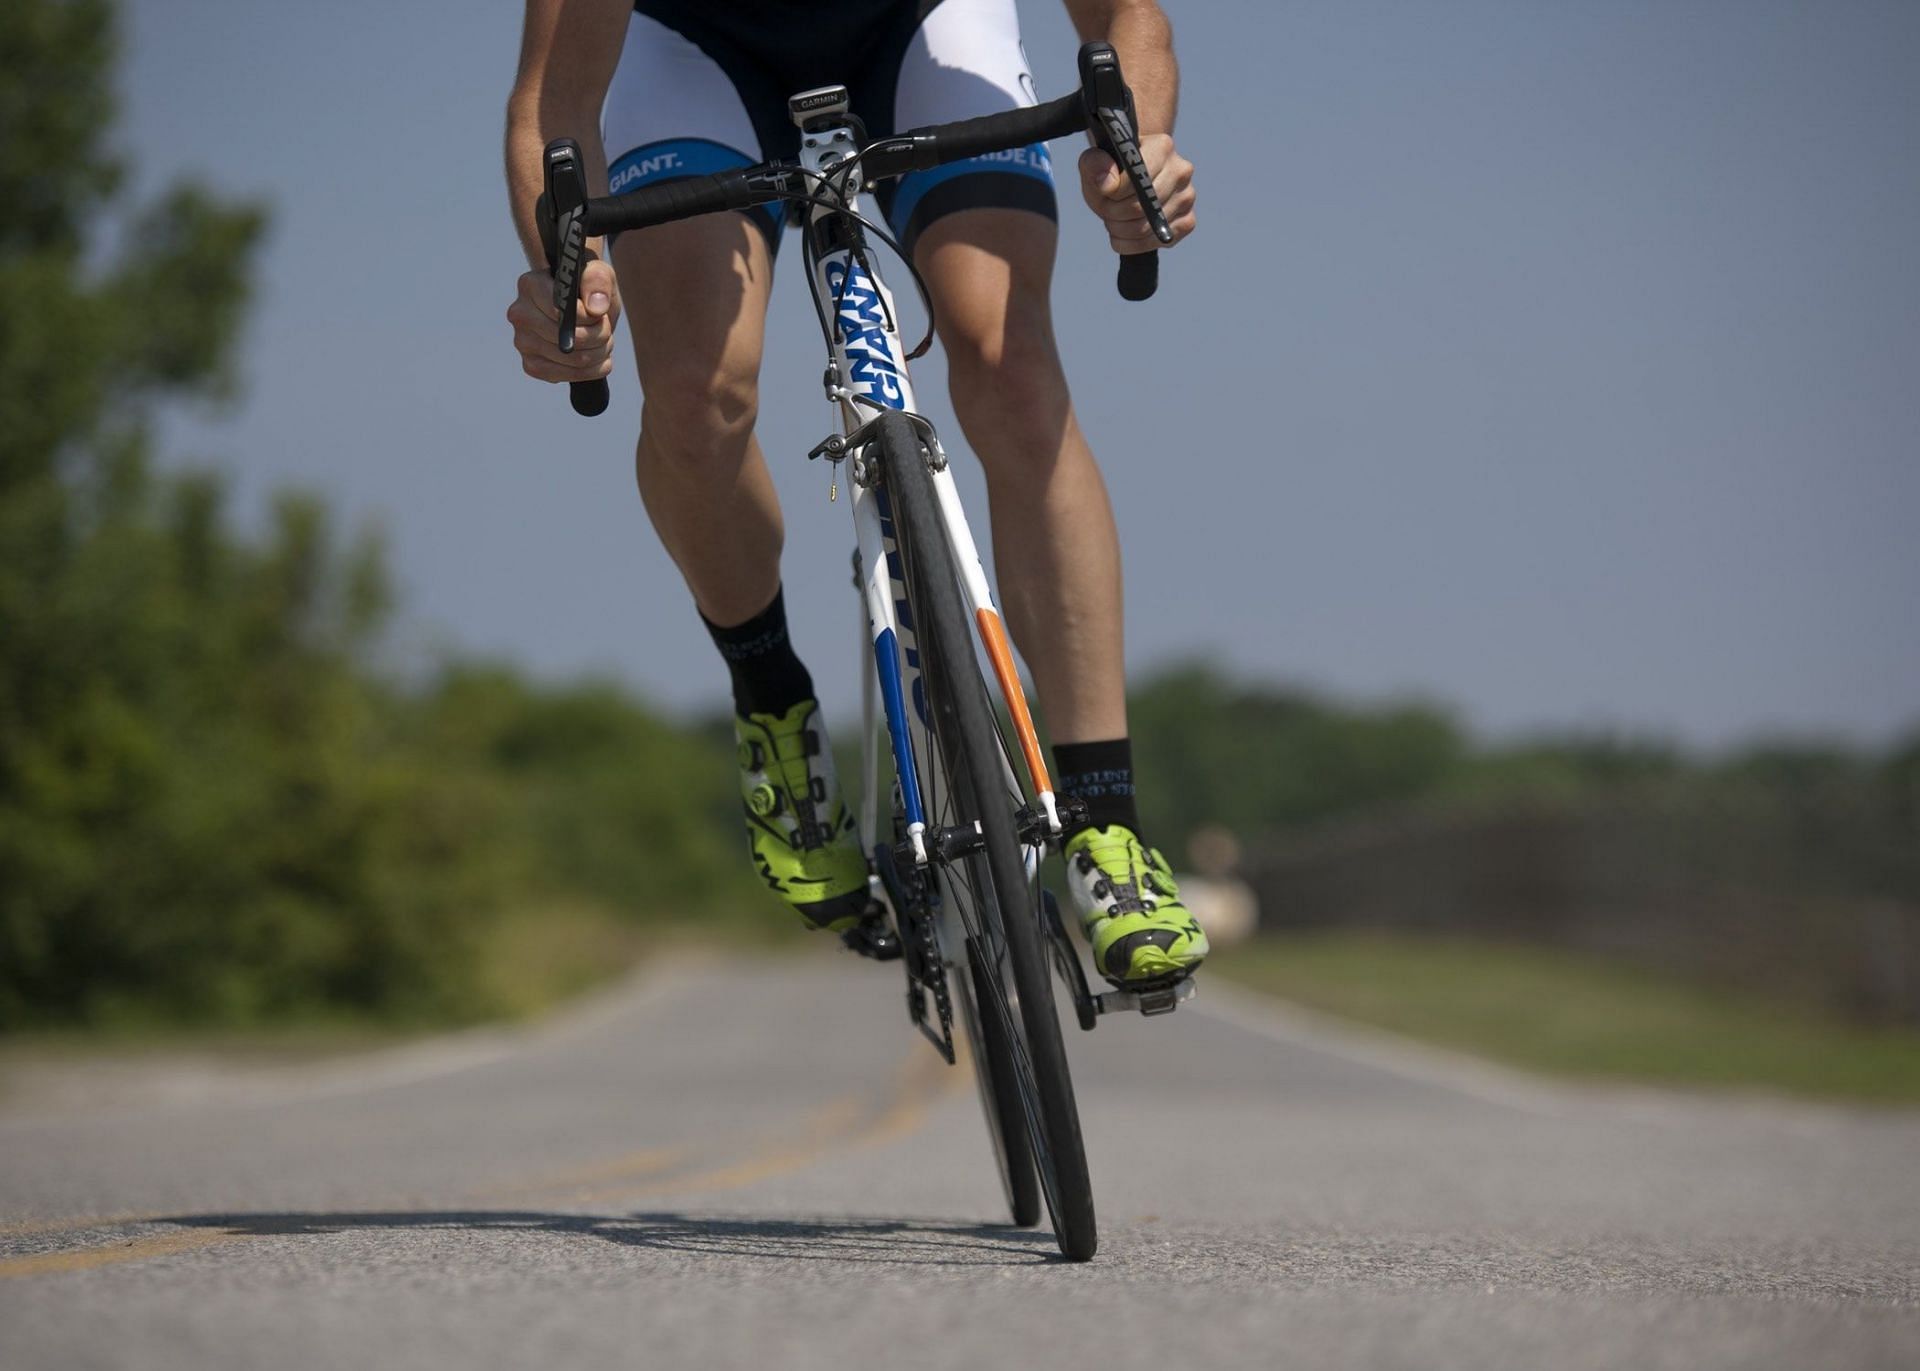 Lower body strength enhances and improves your performance while cycling. (Image via Pexels / Pixabay)